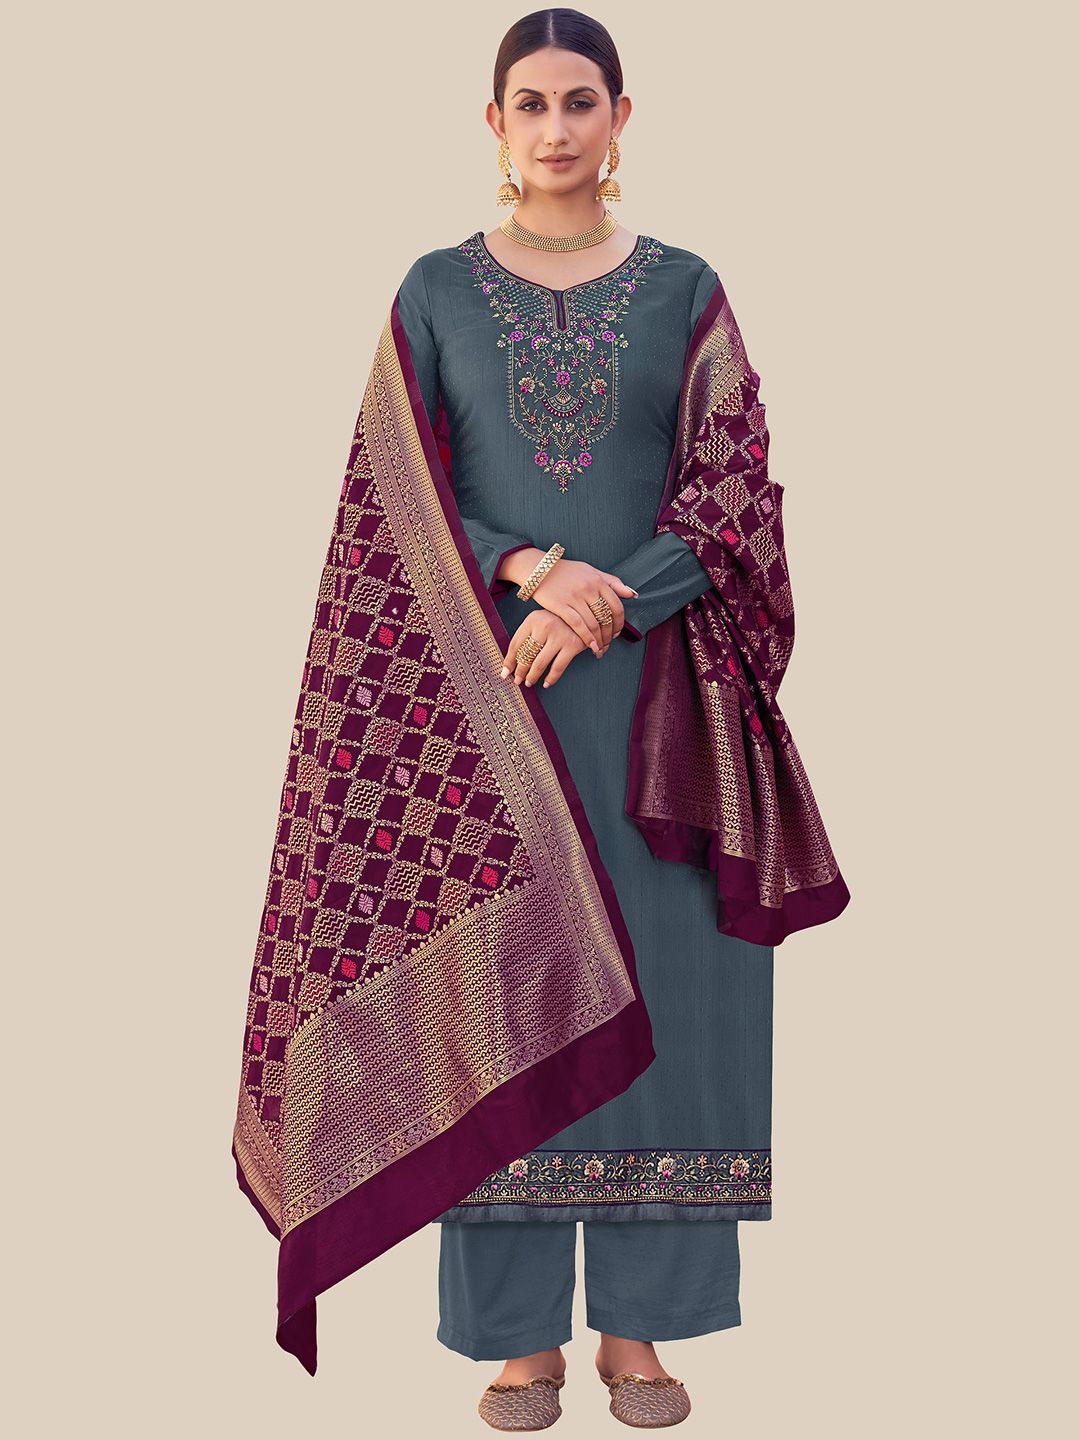 UNITED LIBERTY Grey & Purple Embroidered Satin Semi-Stitched Dress Material Price in India